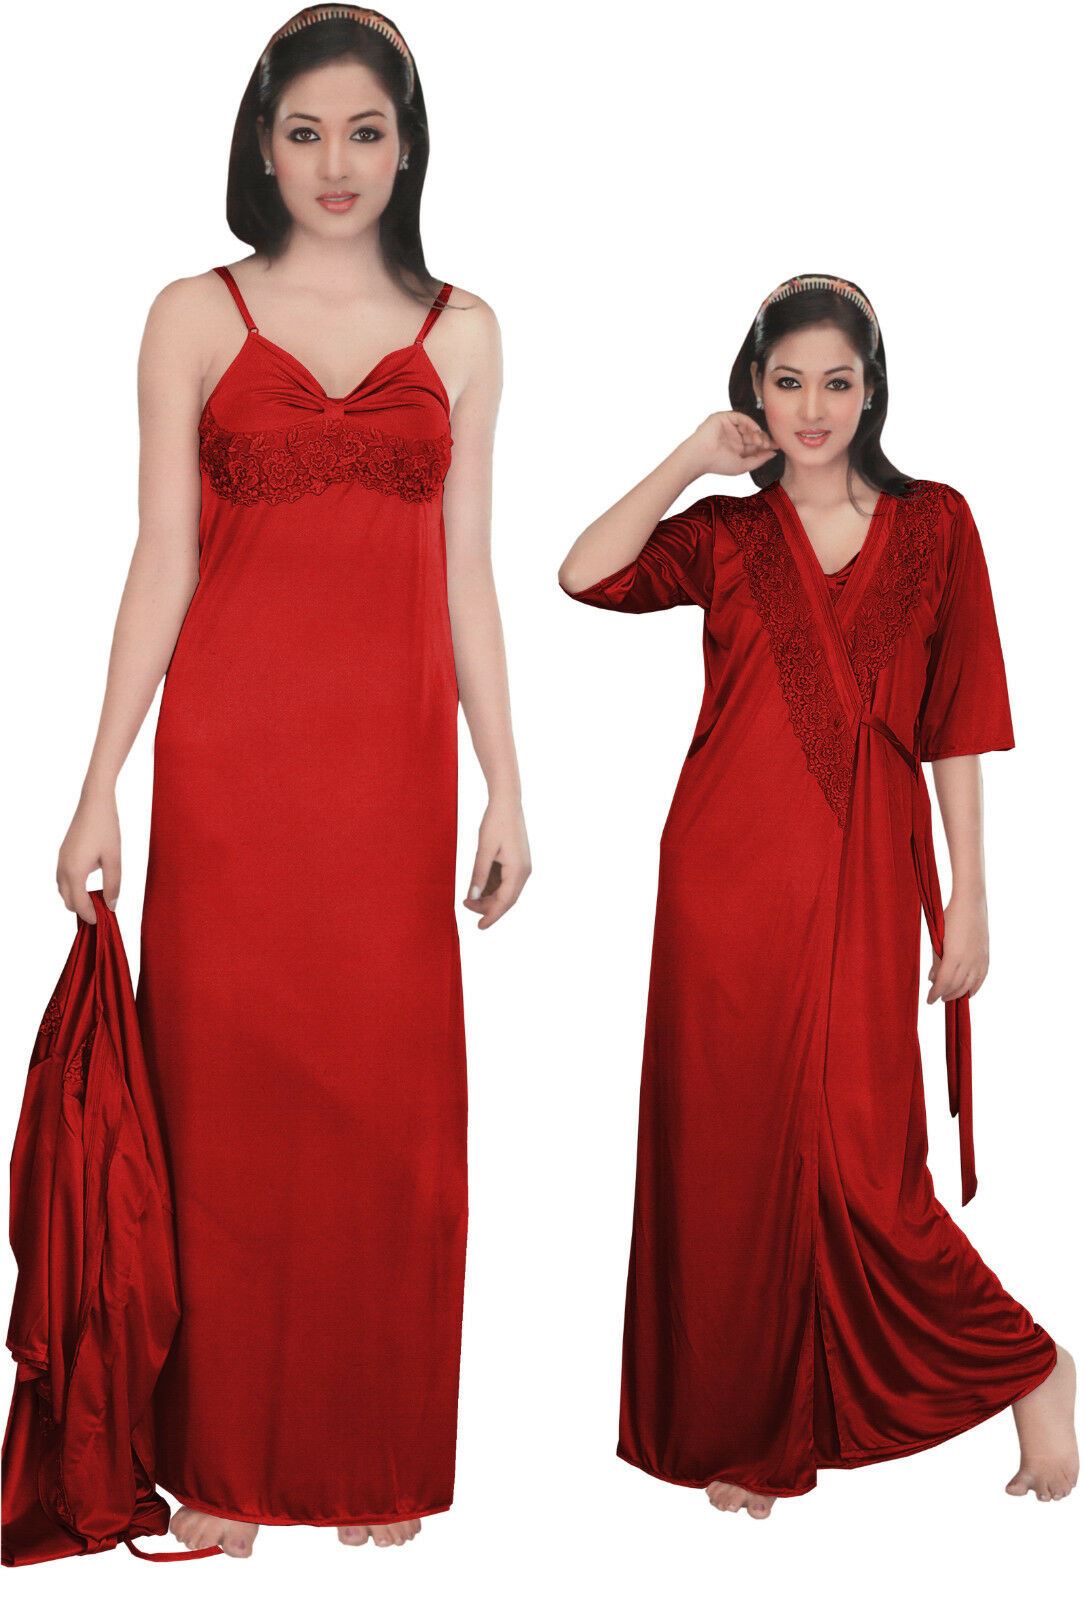 Red / One Size: Regular Women Strappy 2 Pcs Satin Long Nighty and Robe The Orange Tags